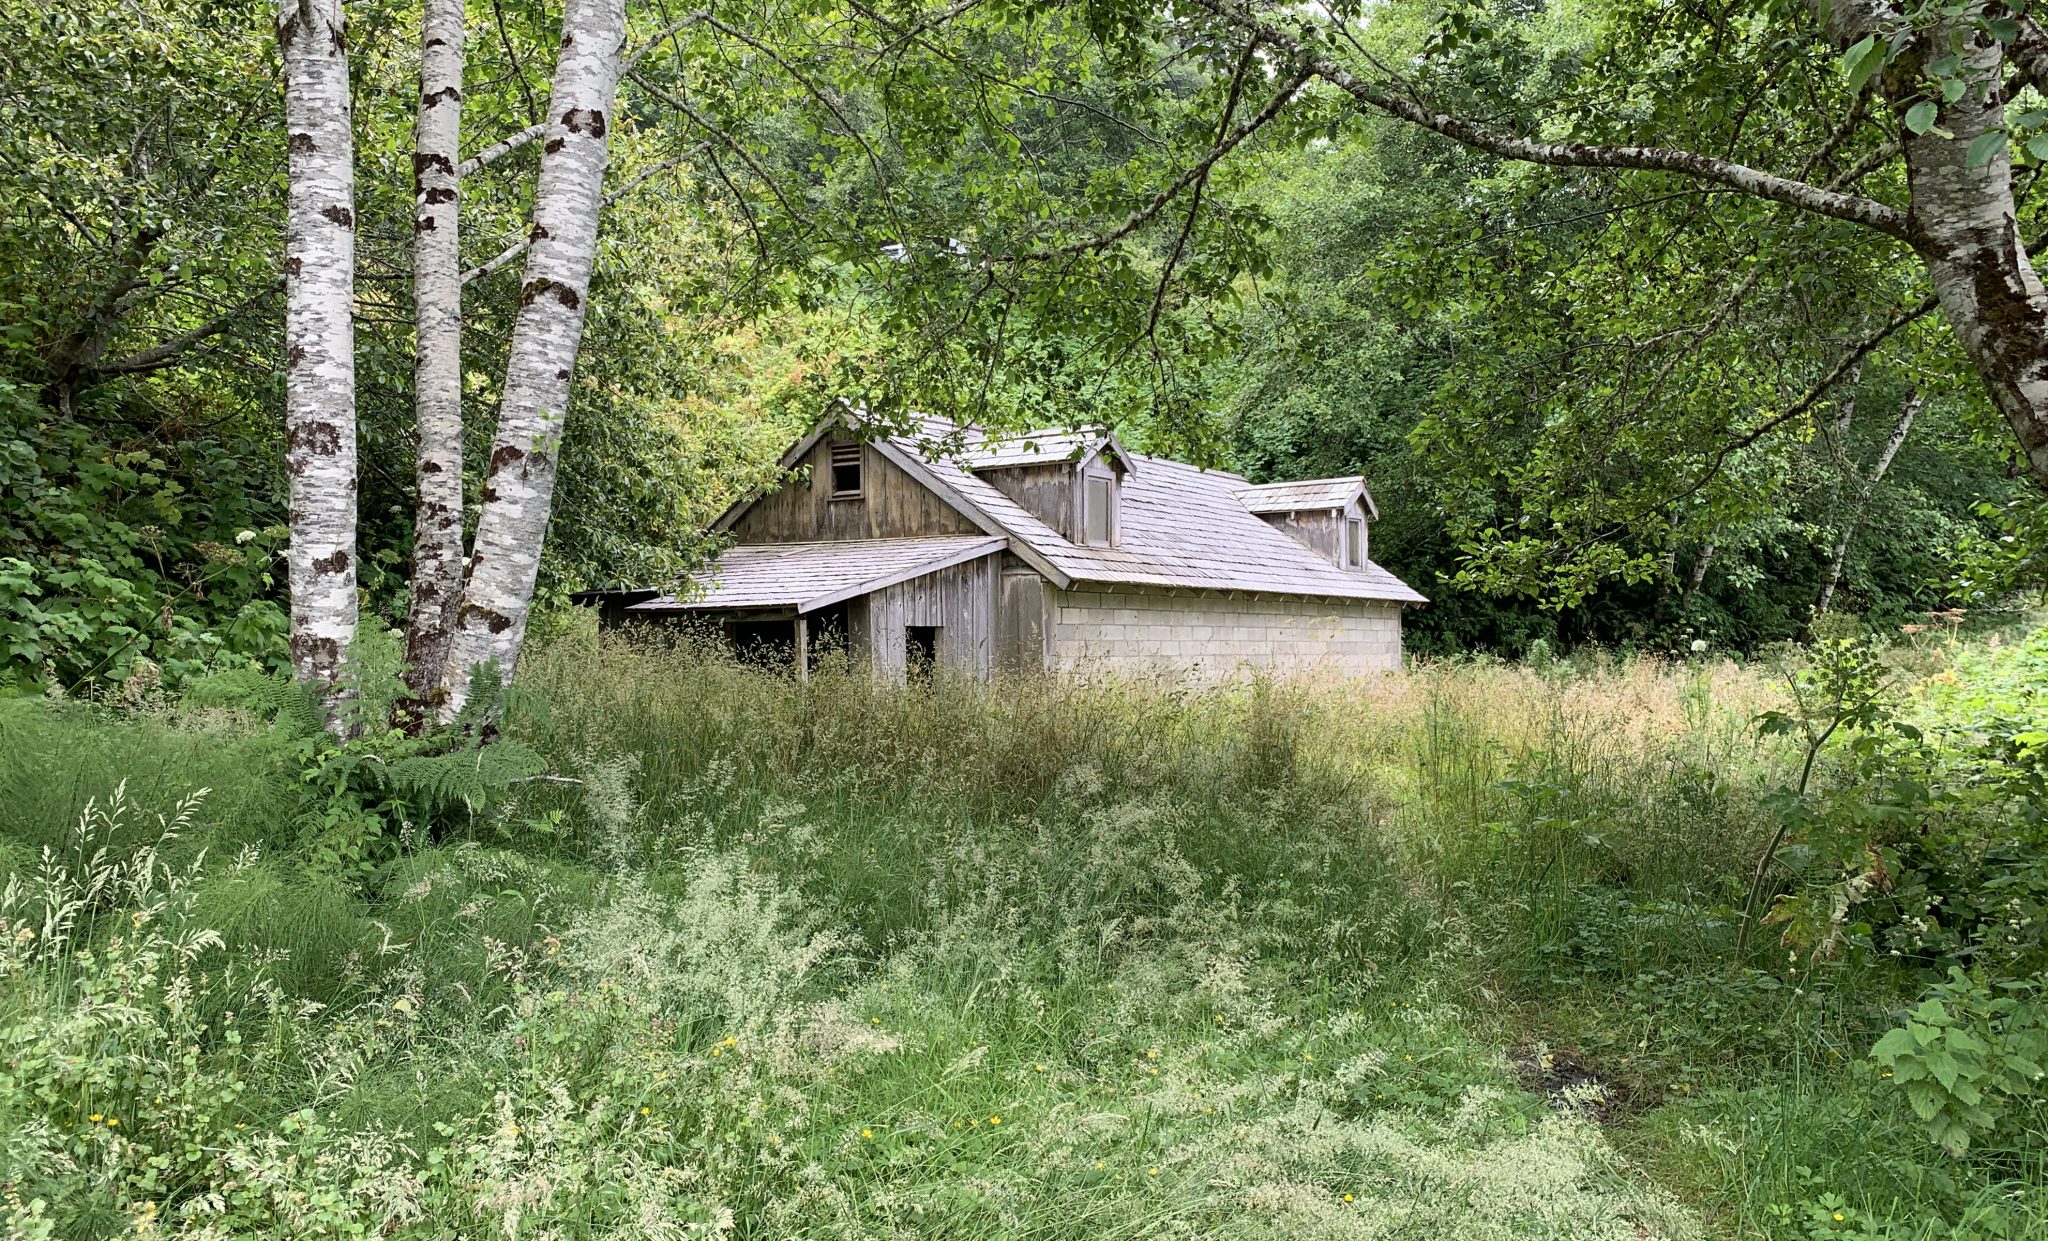 Abandoned Military Building In Tall Grass